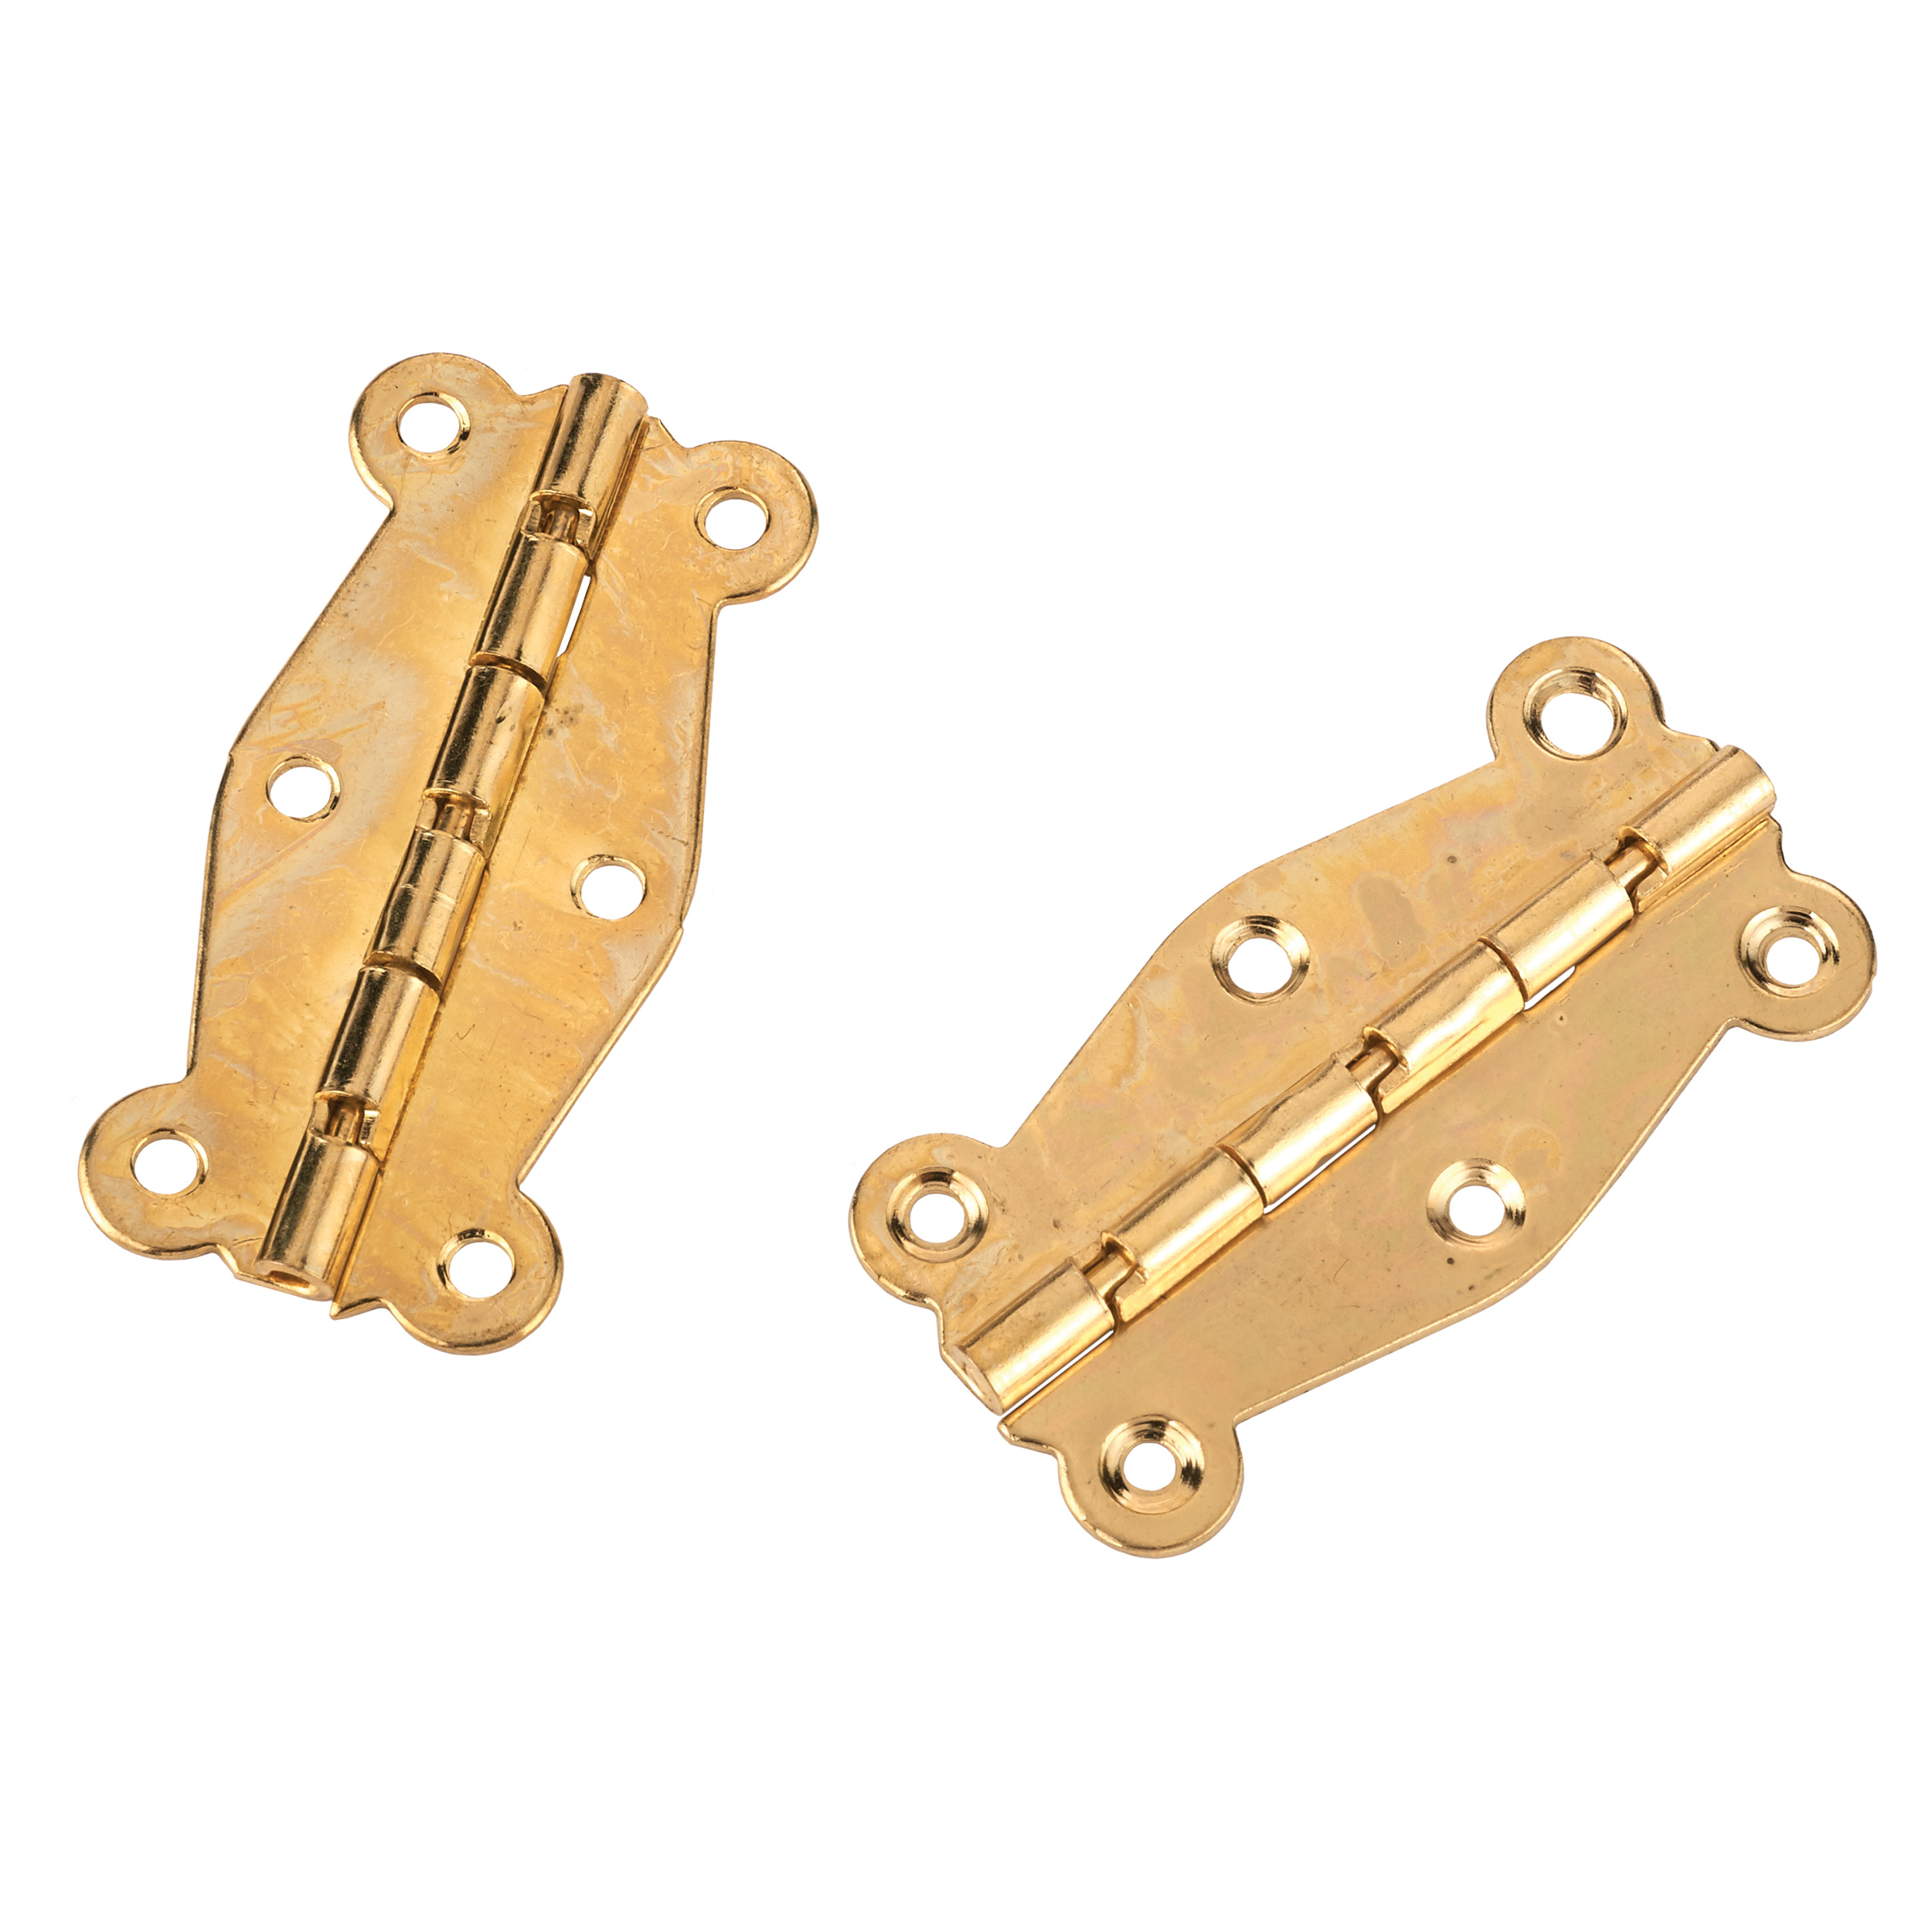 Decorative Box Hinge Polished Brass Plated Pair With Screws